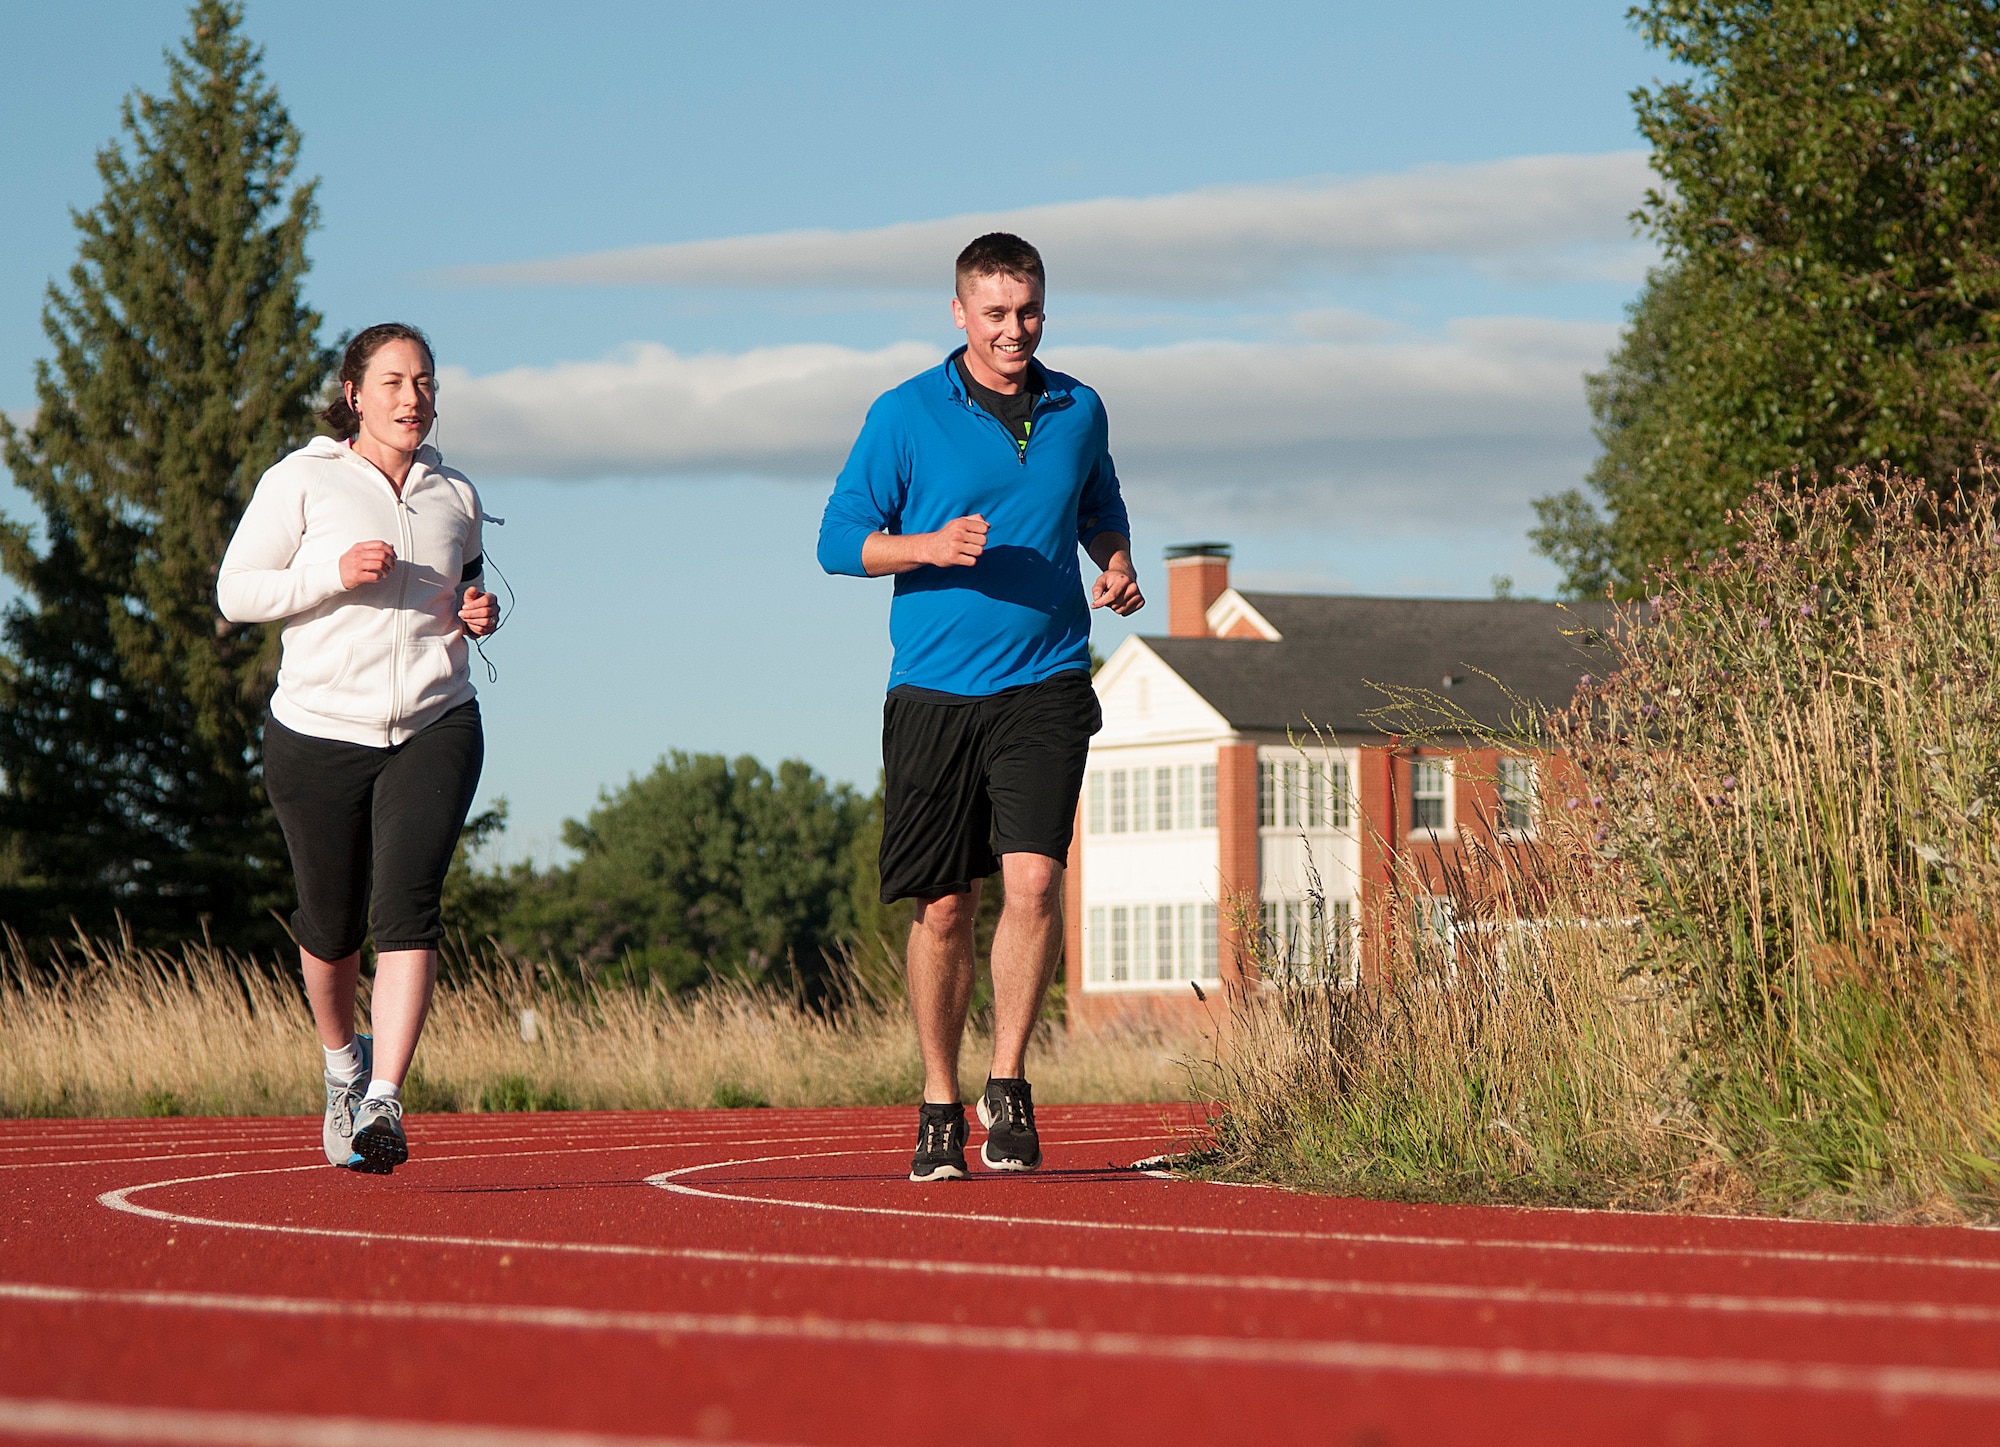 Staff Sgt. Sarah Cox and Airman 1st Class Austin Langlois, 90th Medical Operations Squadron Bioenvironmental Engineering technicians, run on a track on F.E. Warren Air Force Base, Wyo., Aug. 19, 2015. Exercise is recommended by health experts, but over-exertion can lead to a painful condition called Rhabdomyolysis, which is the build up of intracellular material in the blood from damaged muscle tissue. (U.S. Air Force photo by Senior Airman Jason Wiese)